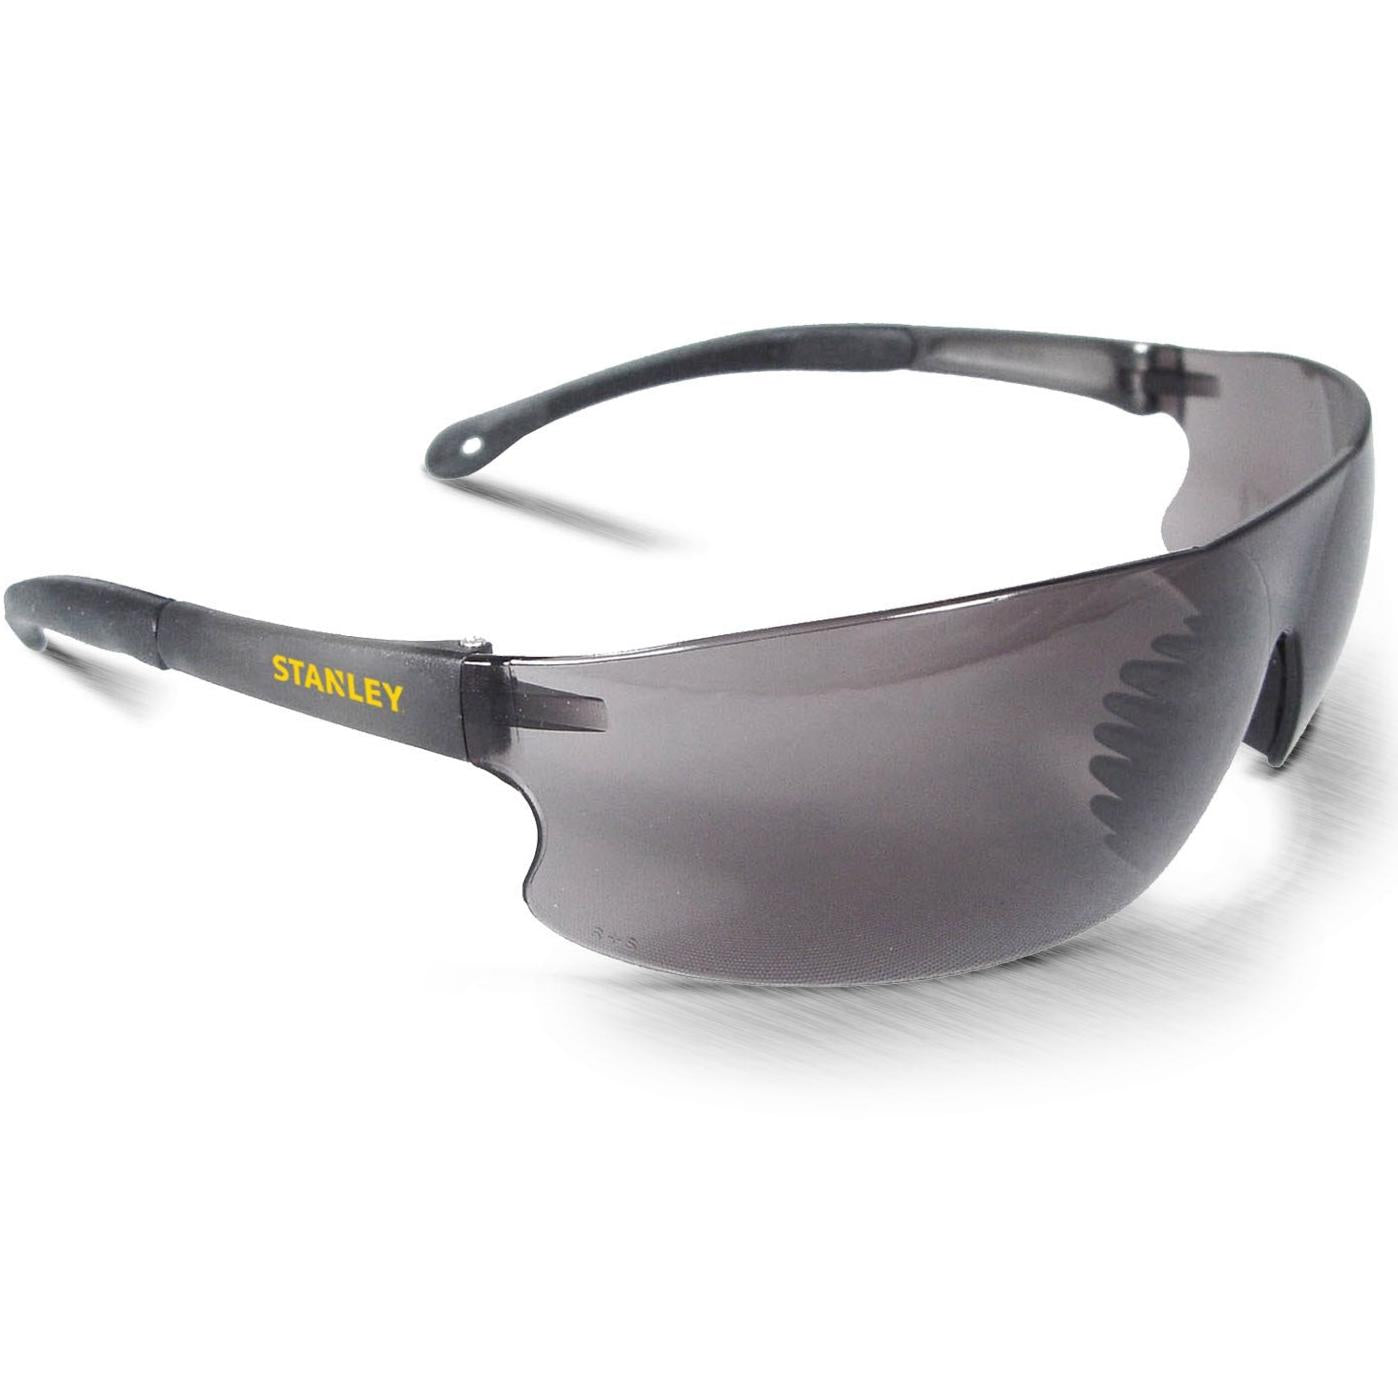 Stanley SY120 Frameless Protective Eyewear Shoes